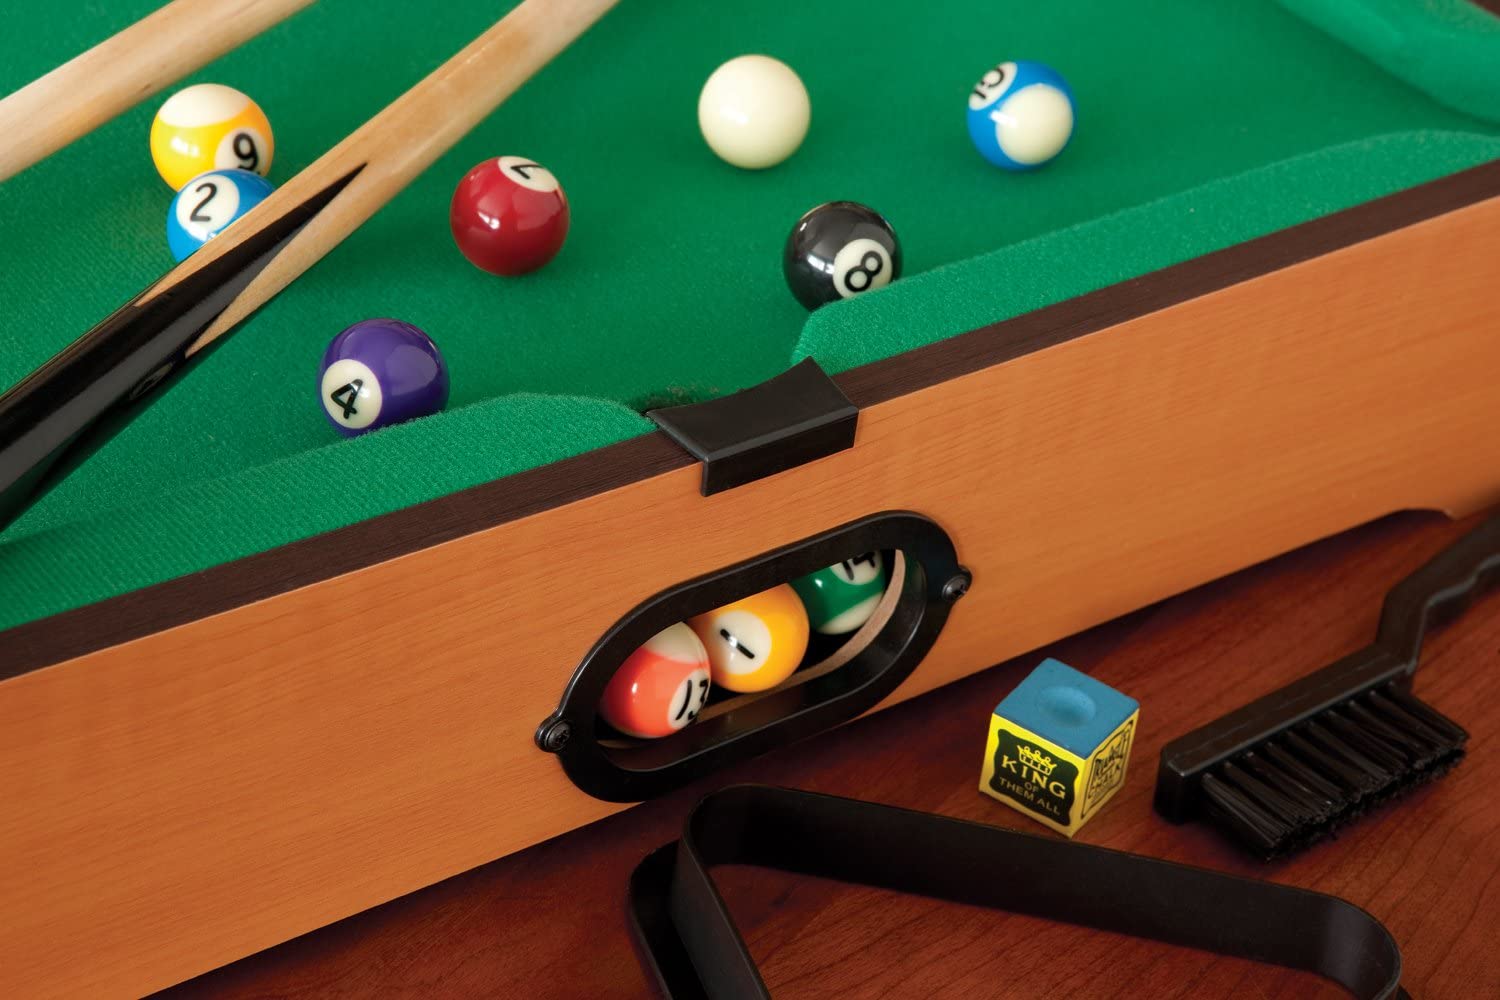 A close-up view of the automatic side ball return chute on a table-top size billiard game set.